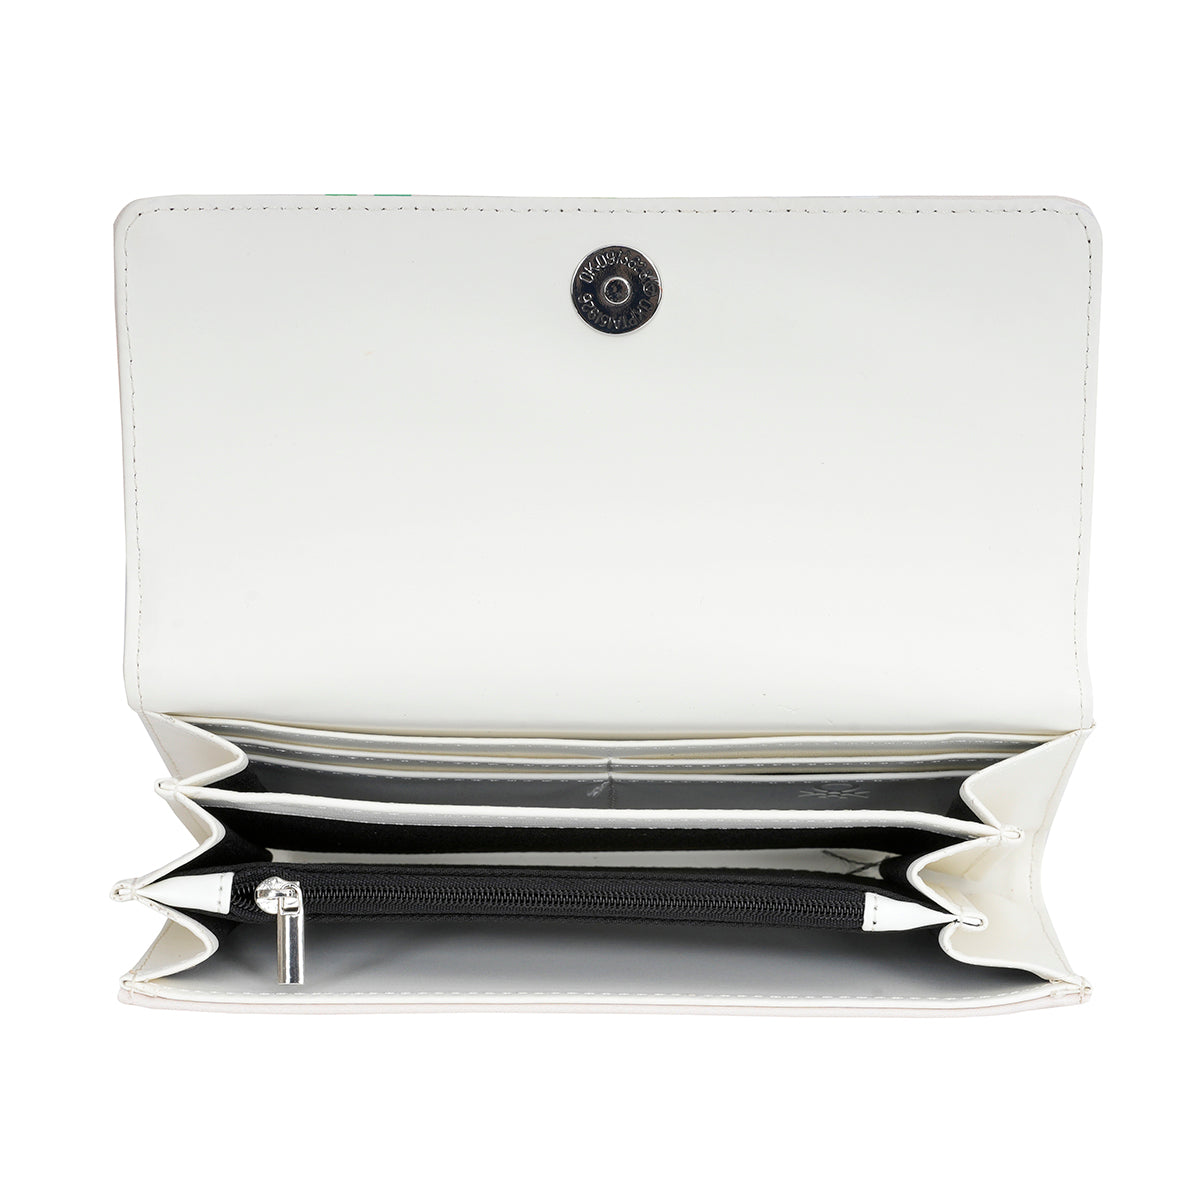 United Colors of Benetton Nadia Wallet white